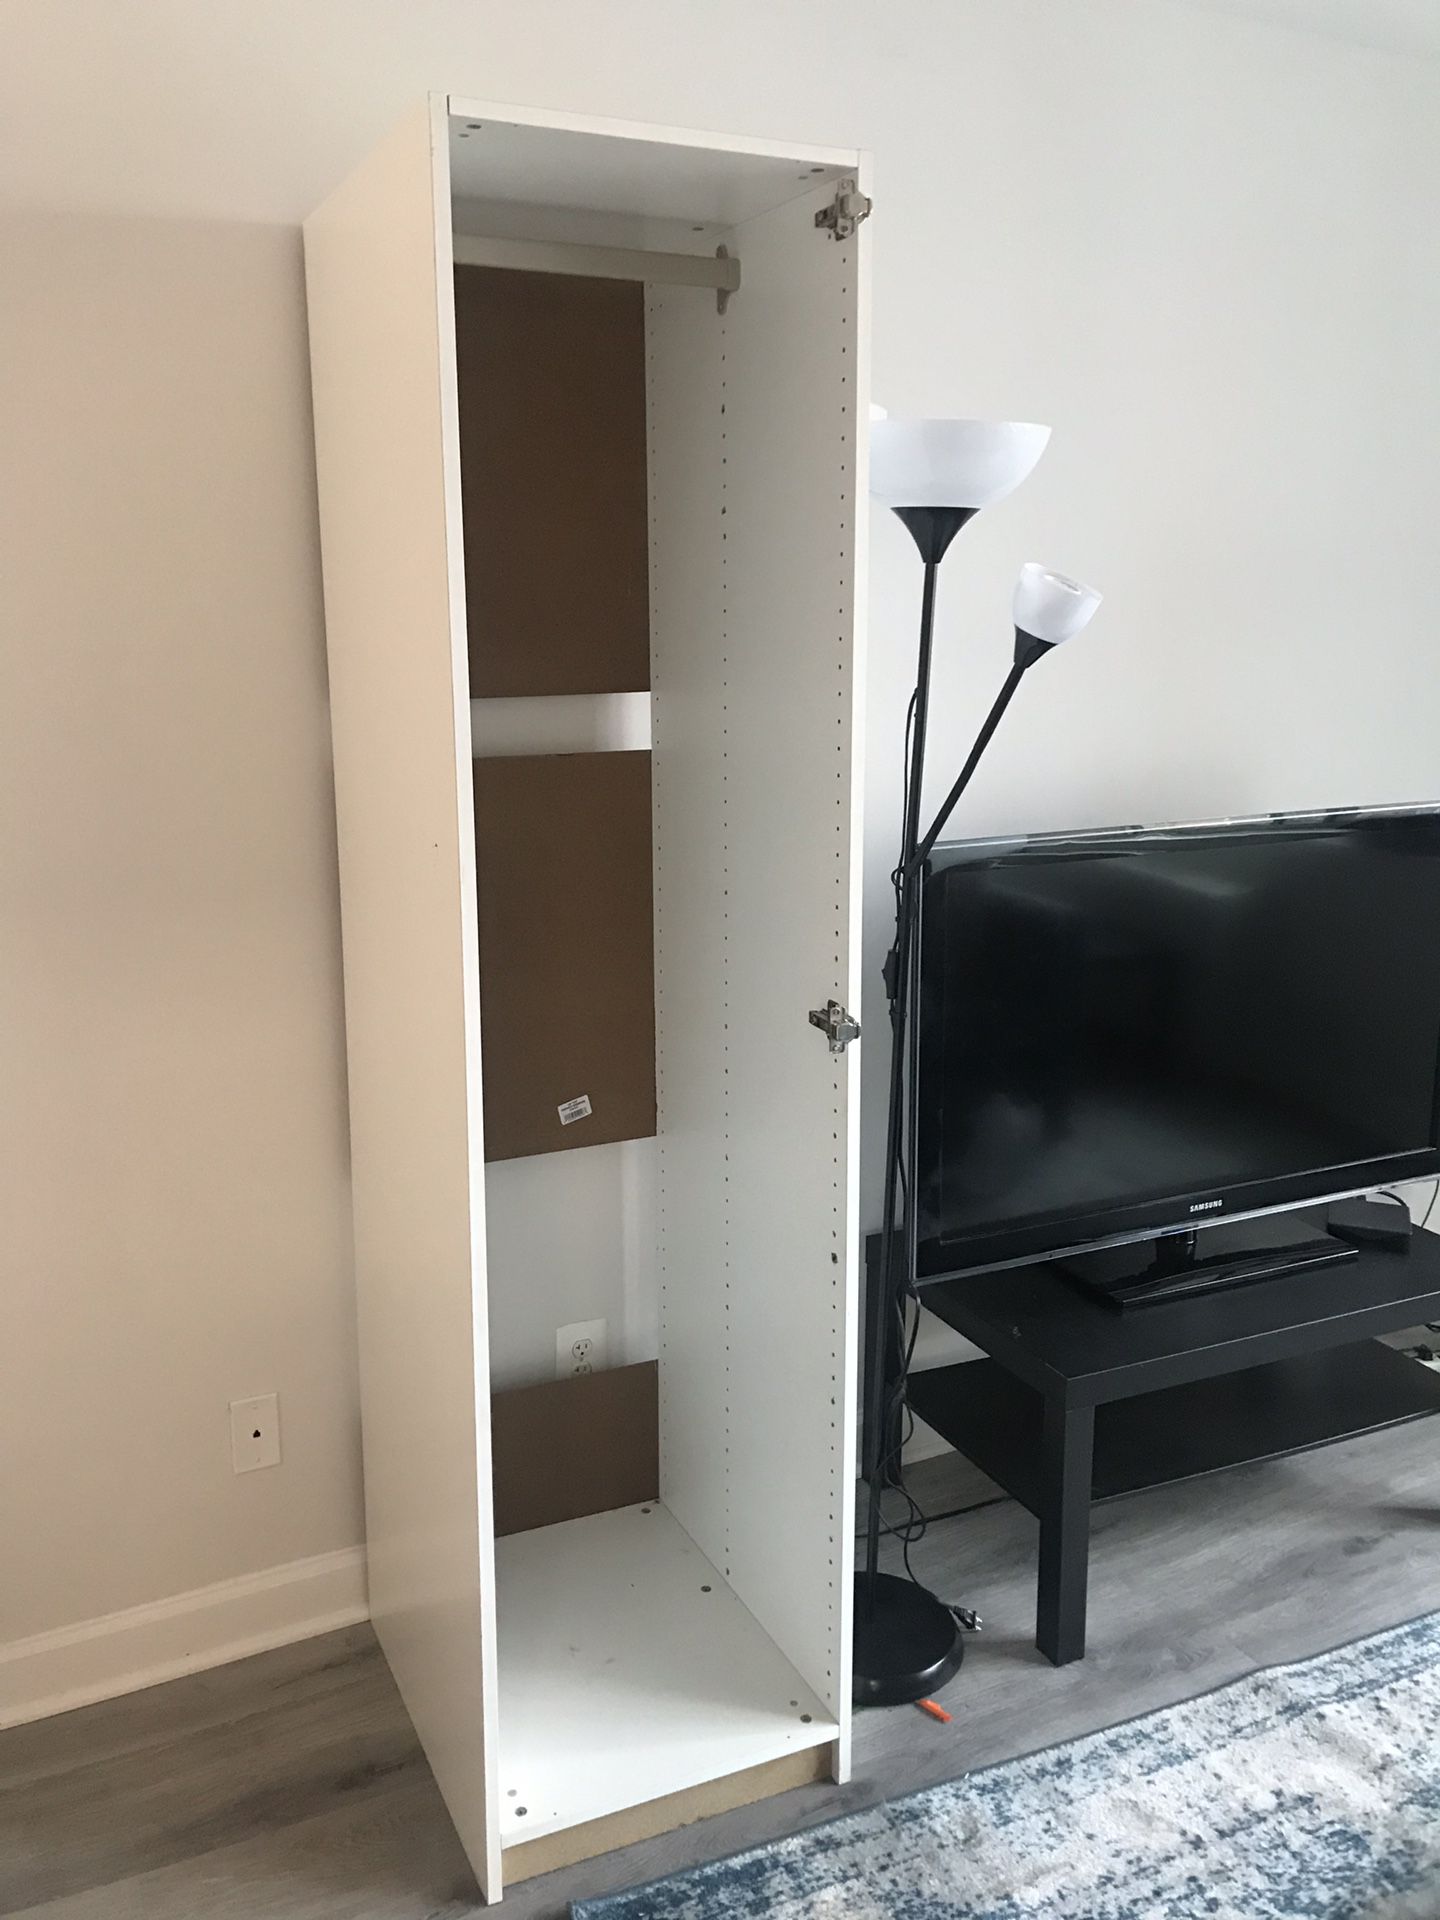 IKEA PAX closet with clothes rod and door hinges